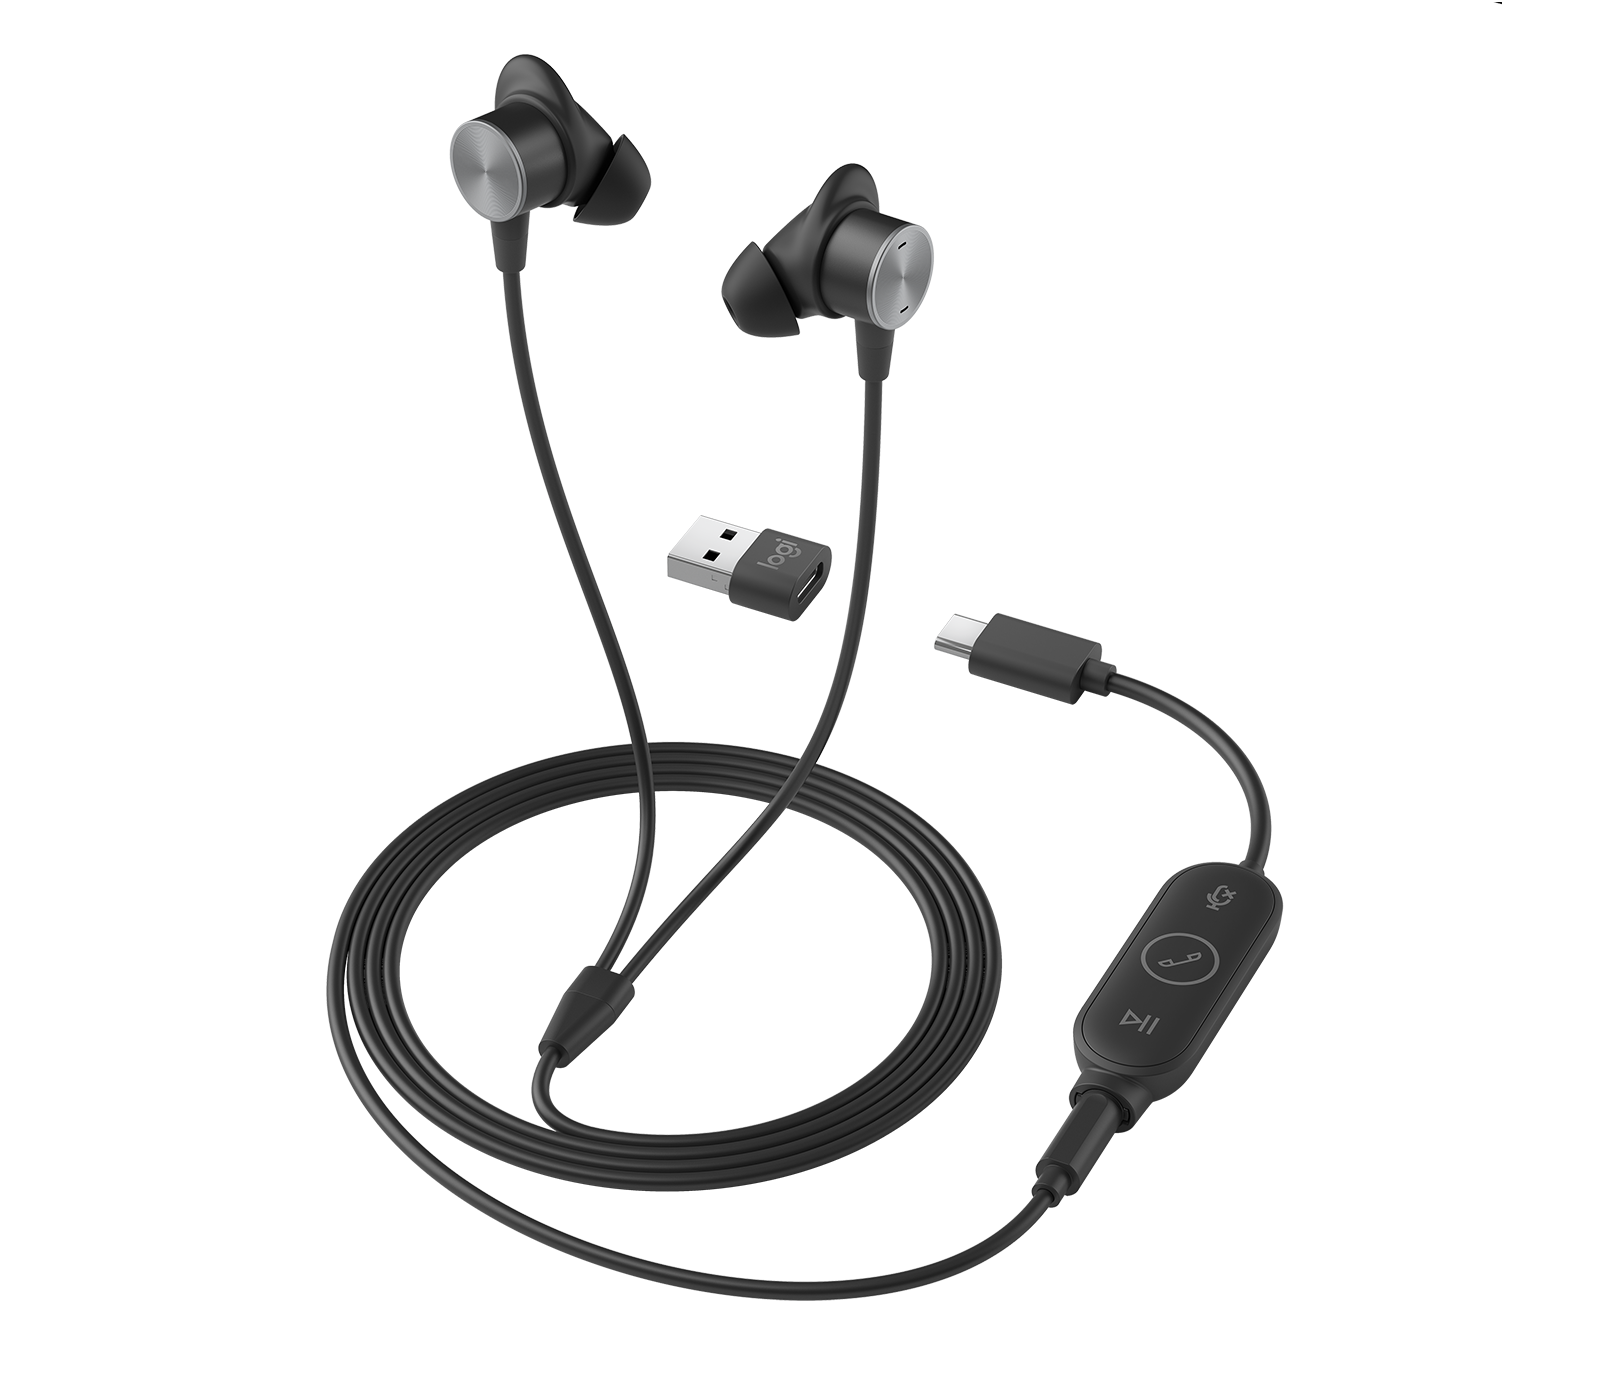 Logitech Zone Wired Earbuds with Noise Cancelling Mic